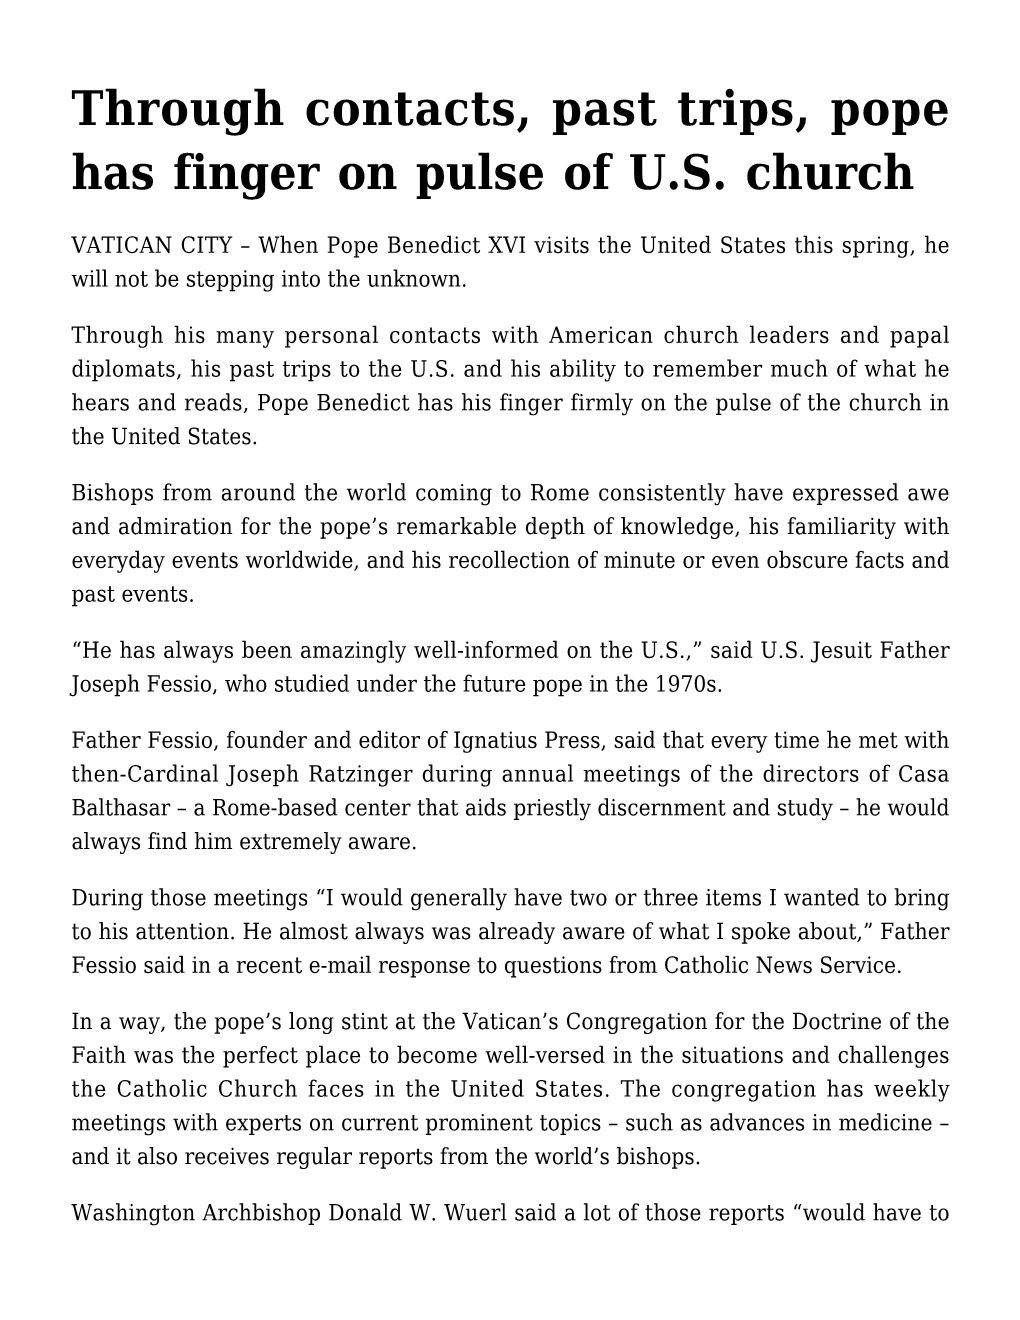 Through Contacts, Past Trips, Pope Has Finger on Pulse of U.S. Church